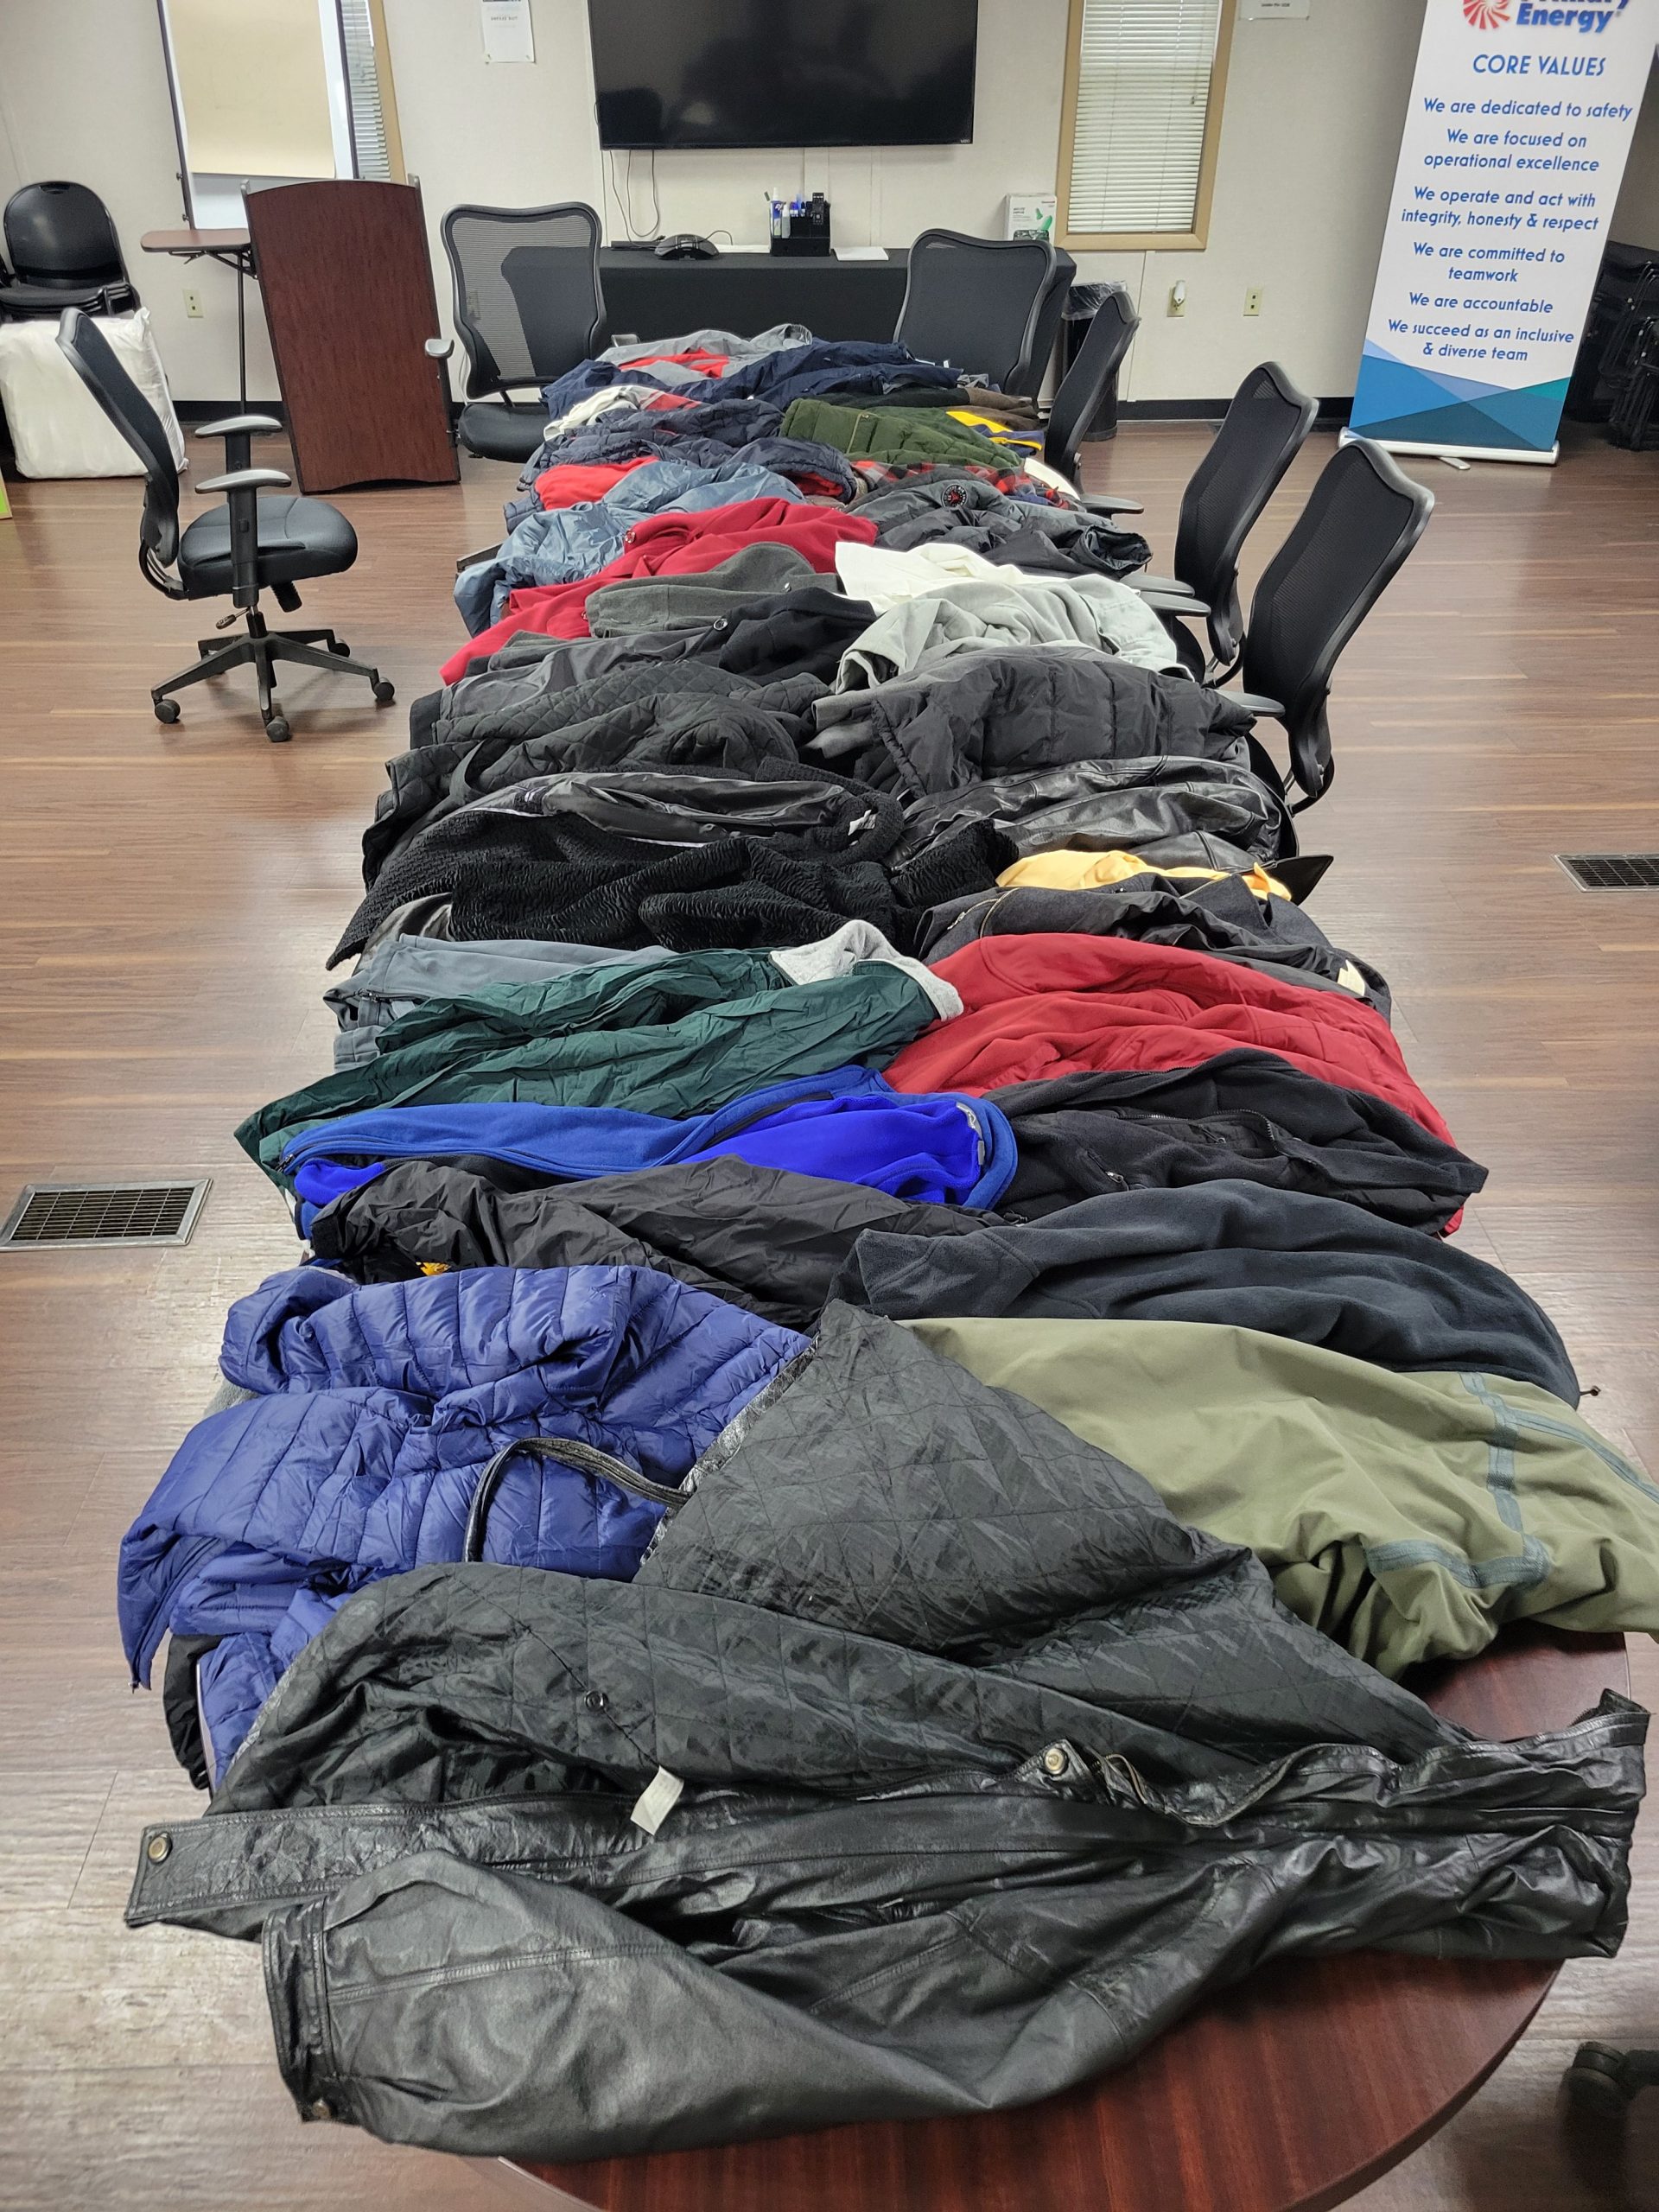 Photo of the coats and other gear collected for donation.